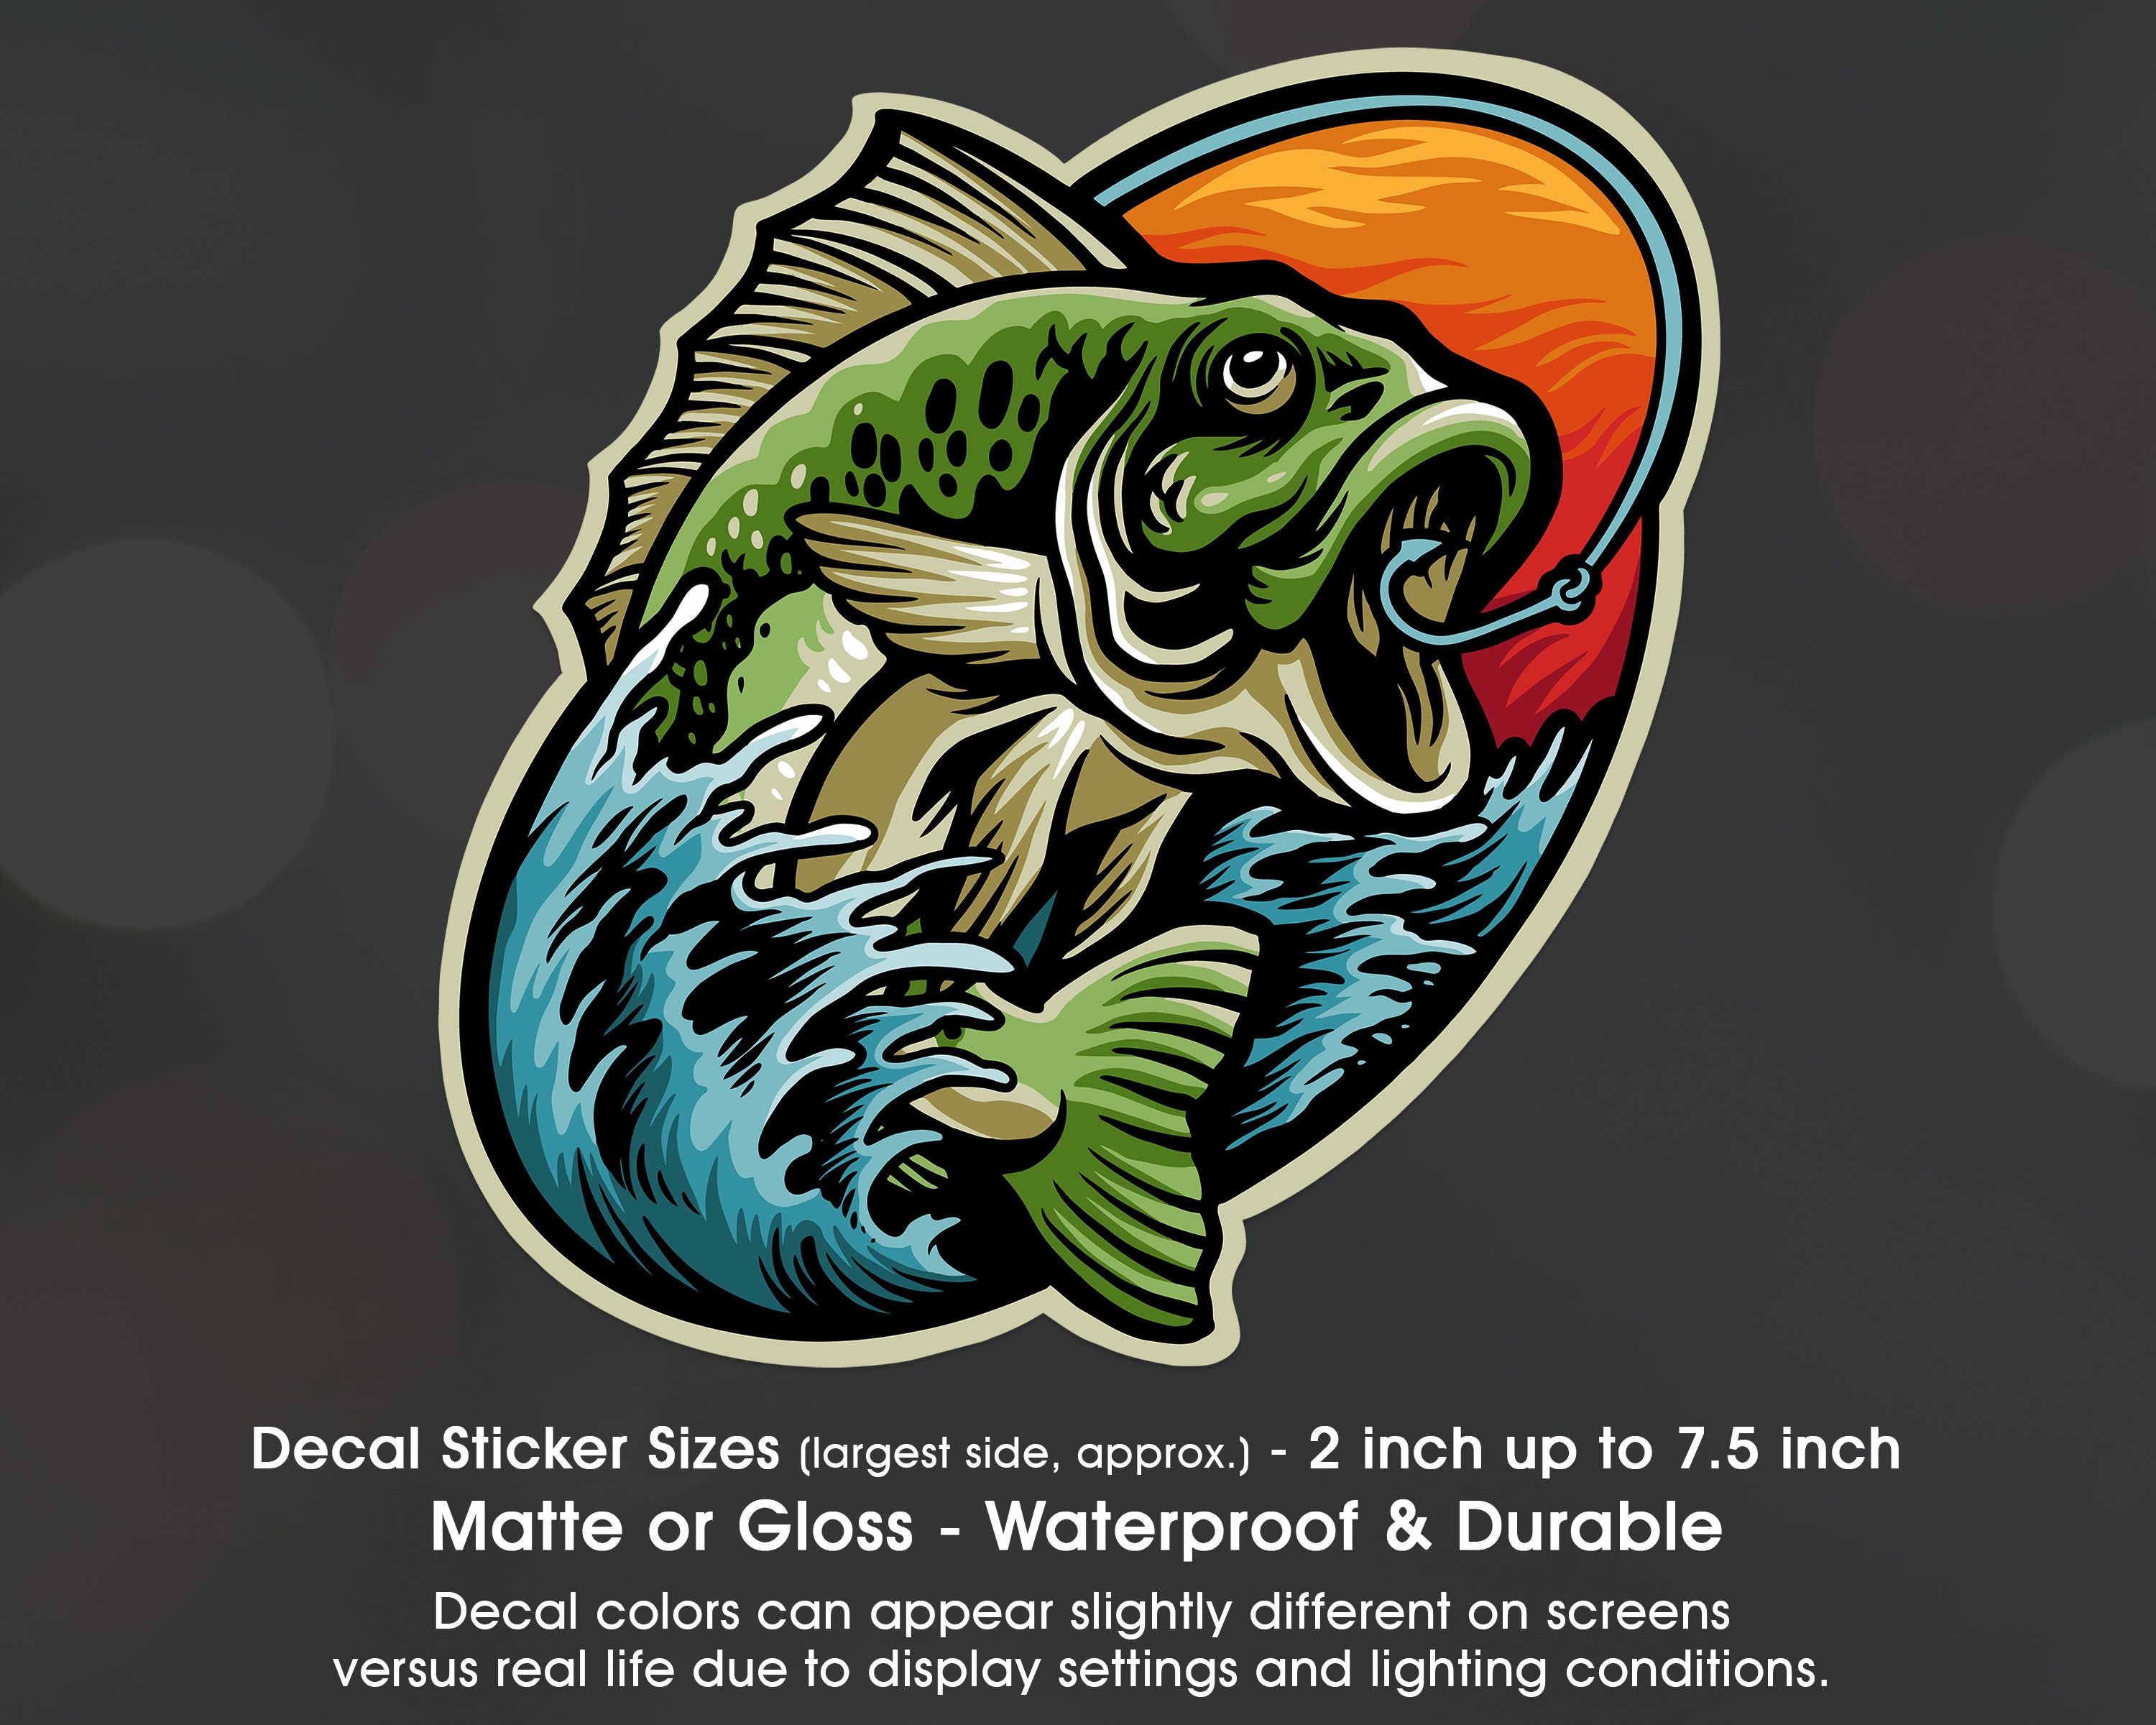 Bass Fishing Water Scene, Vinyl Decal Sticker Sizes 2 Inch up to 7.5 Inch,  Waterproof & Durable 